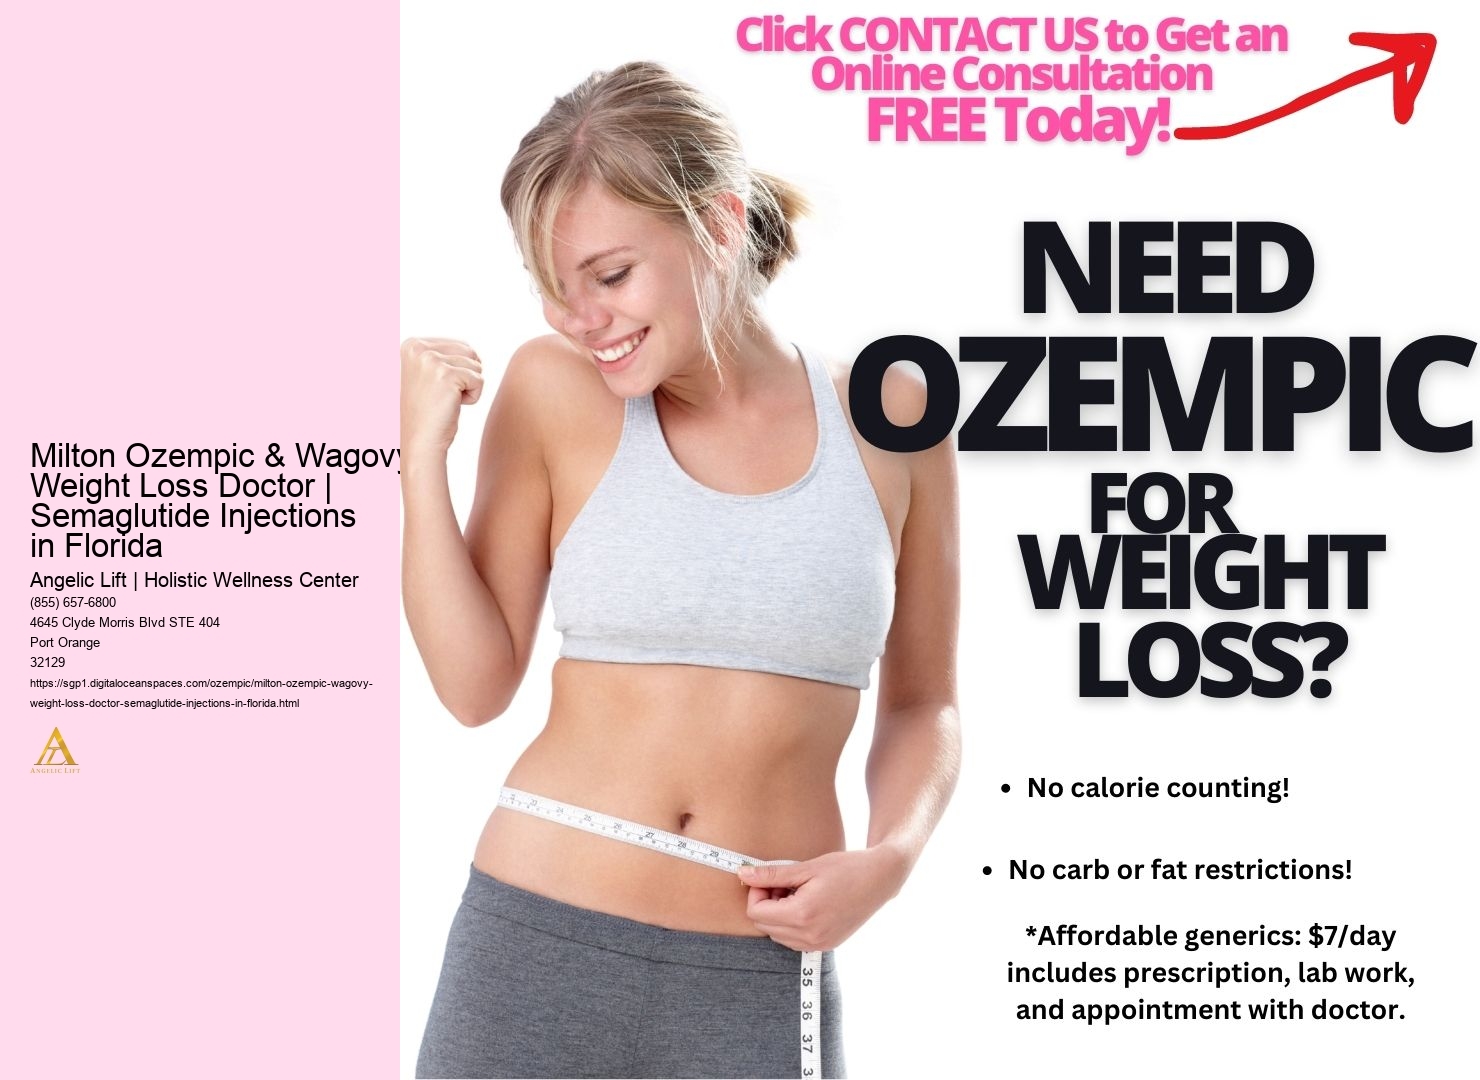 Milton Ozempic & Wagovy Weight Loss Doctor | Semaglutide Injections in Florida